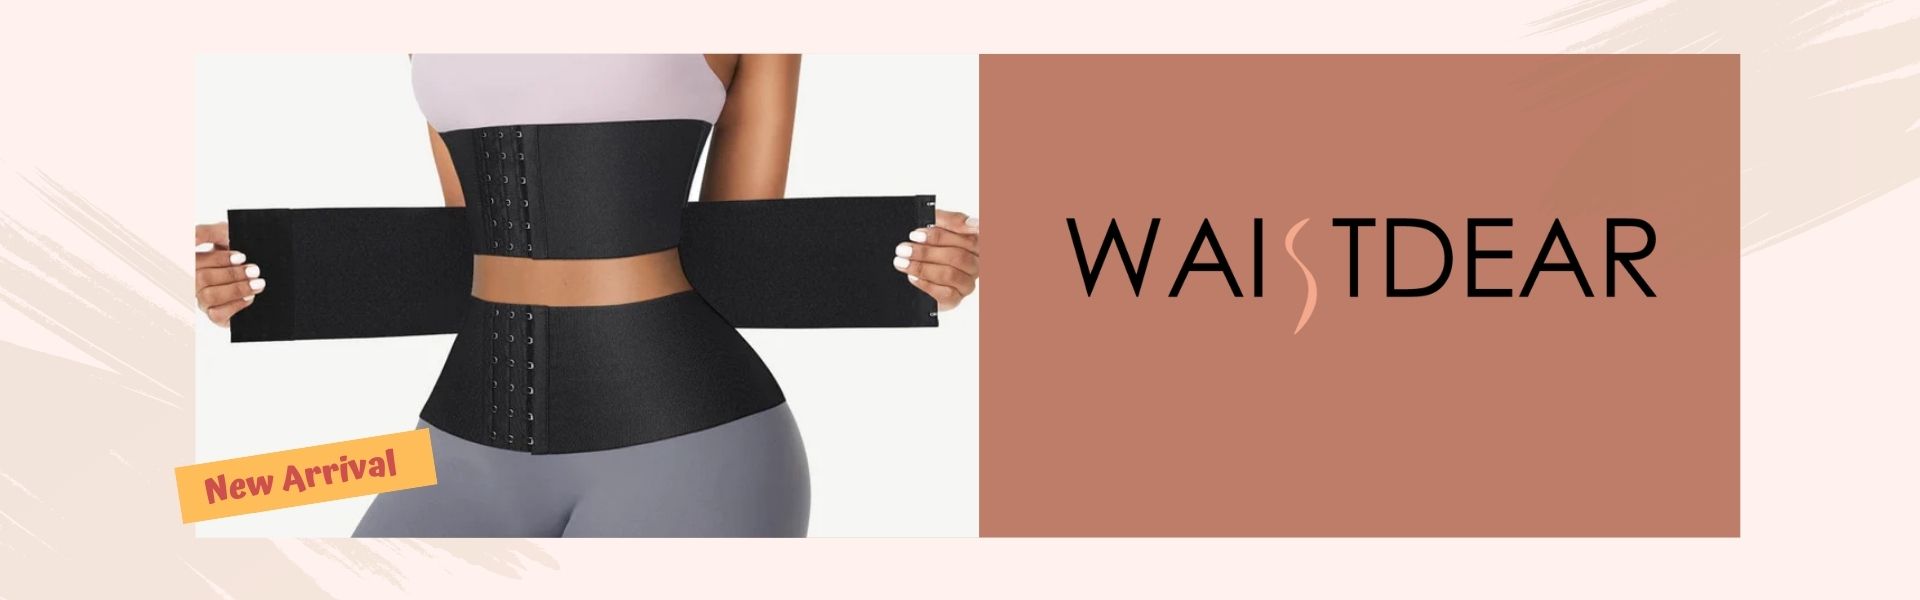 Currently Shop Waist Trainers At Waistdear’s For Less Than $10